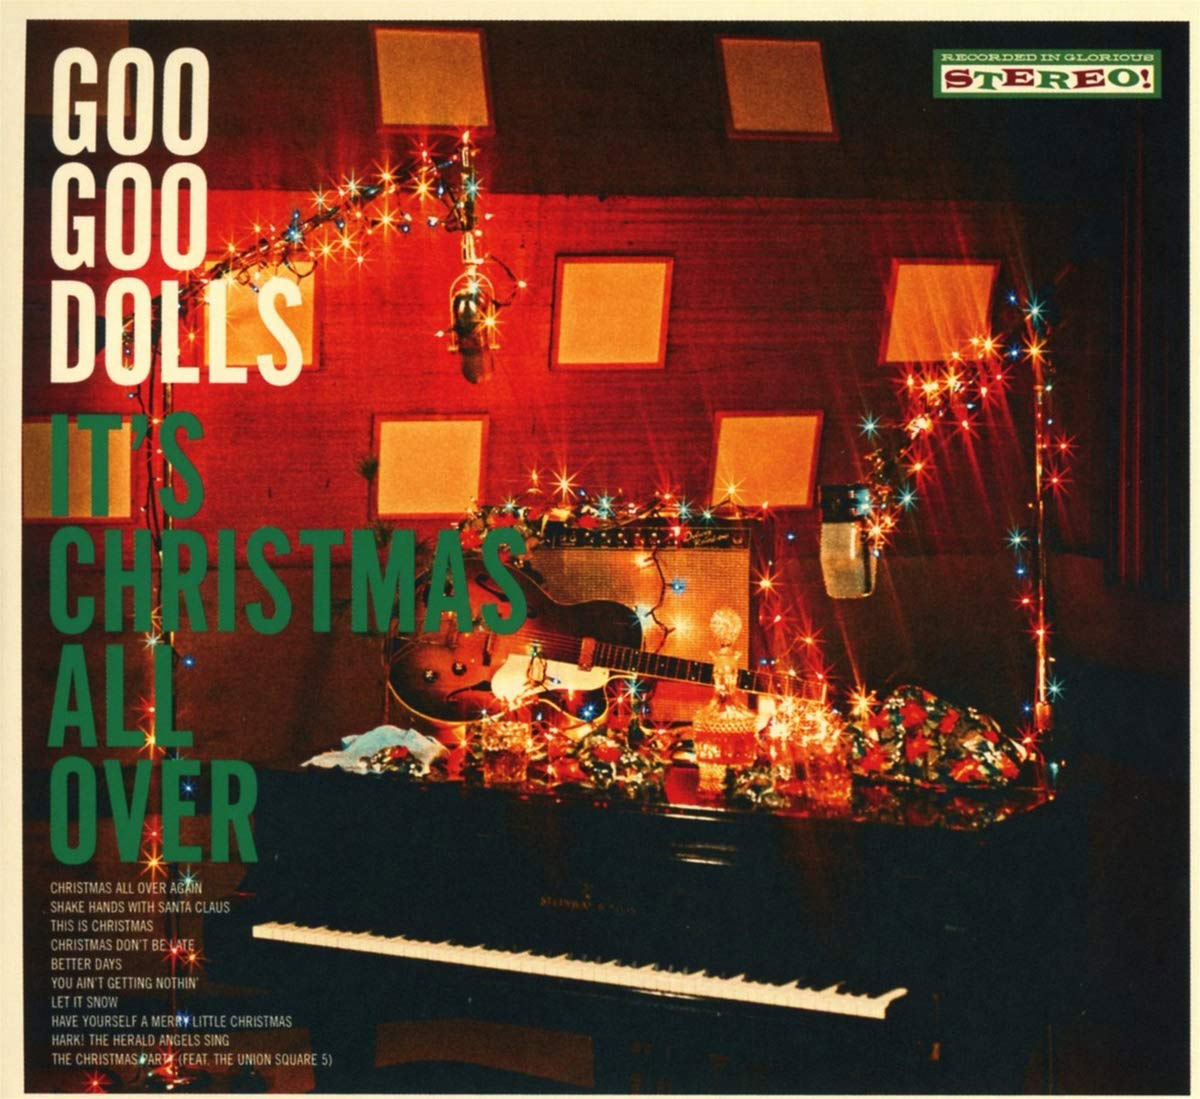 The Goo Goo Dolls' rock sound gets a bit melancholy in It’s Christmas All Over.